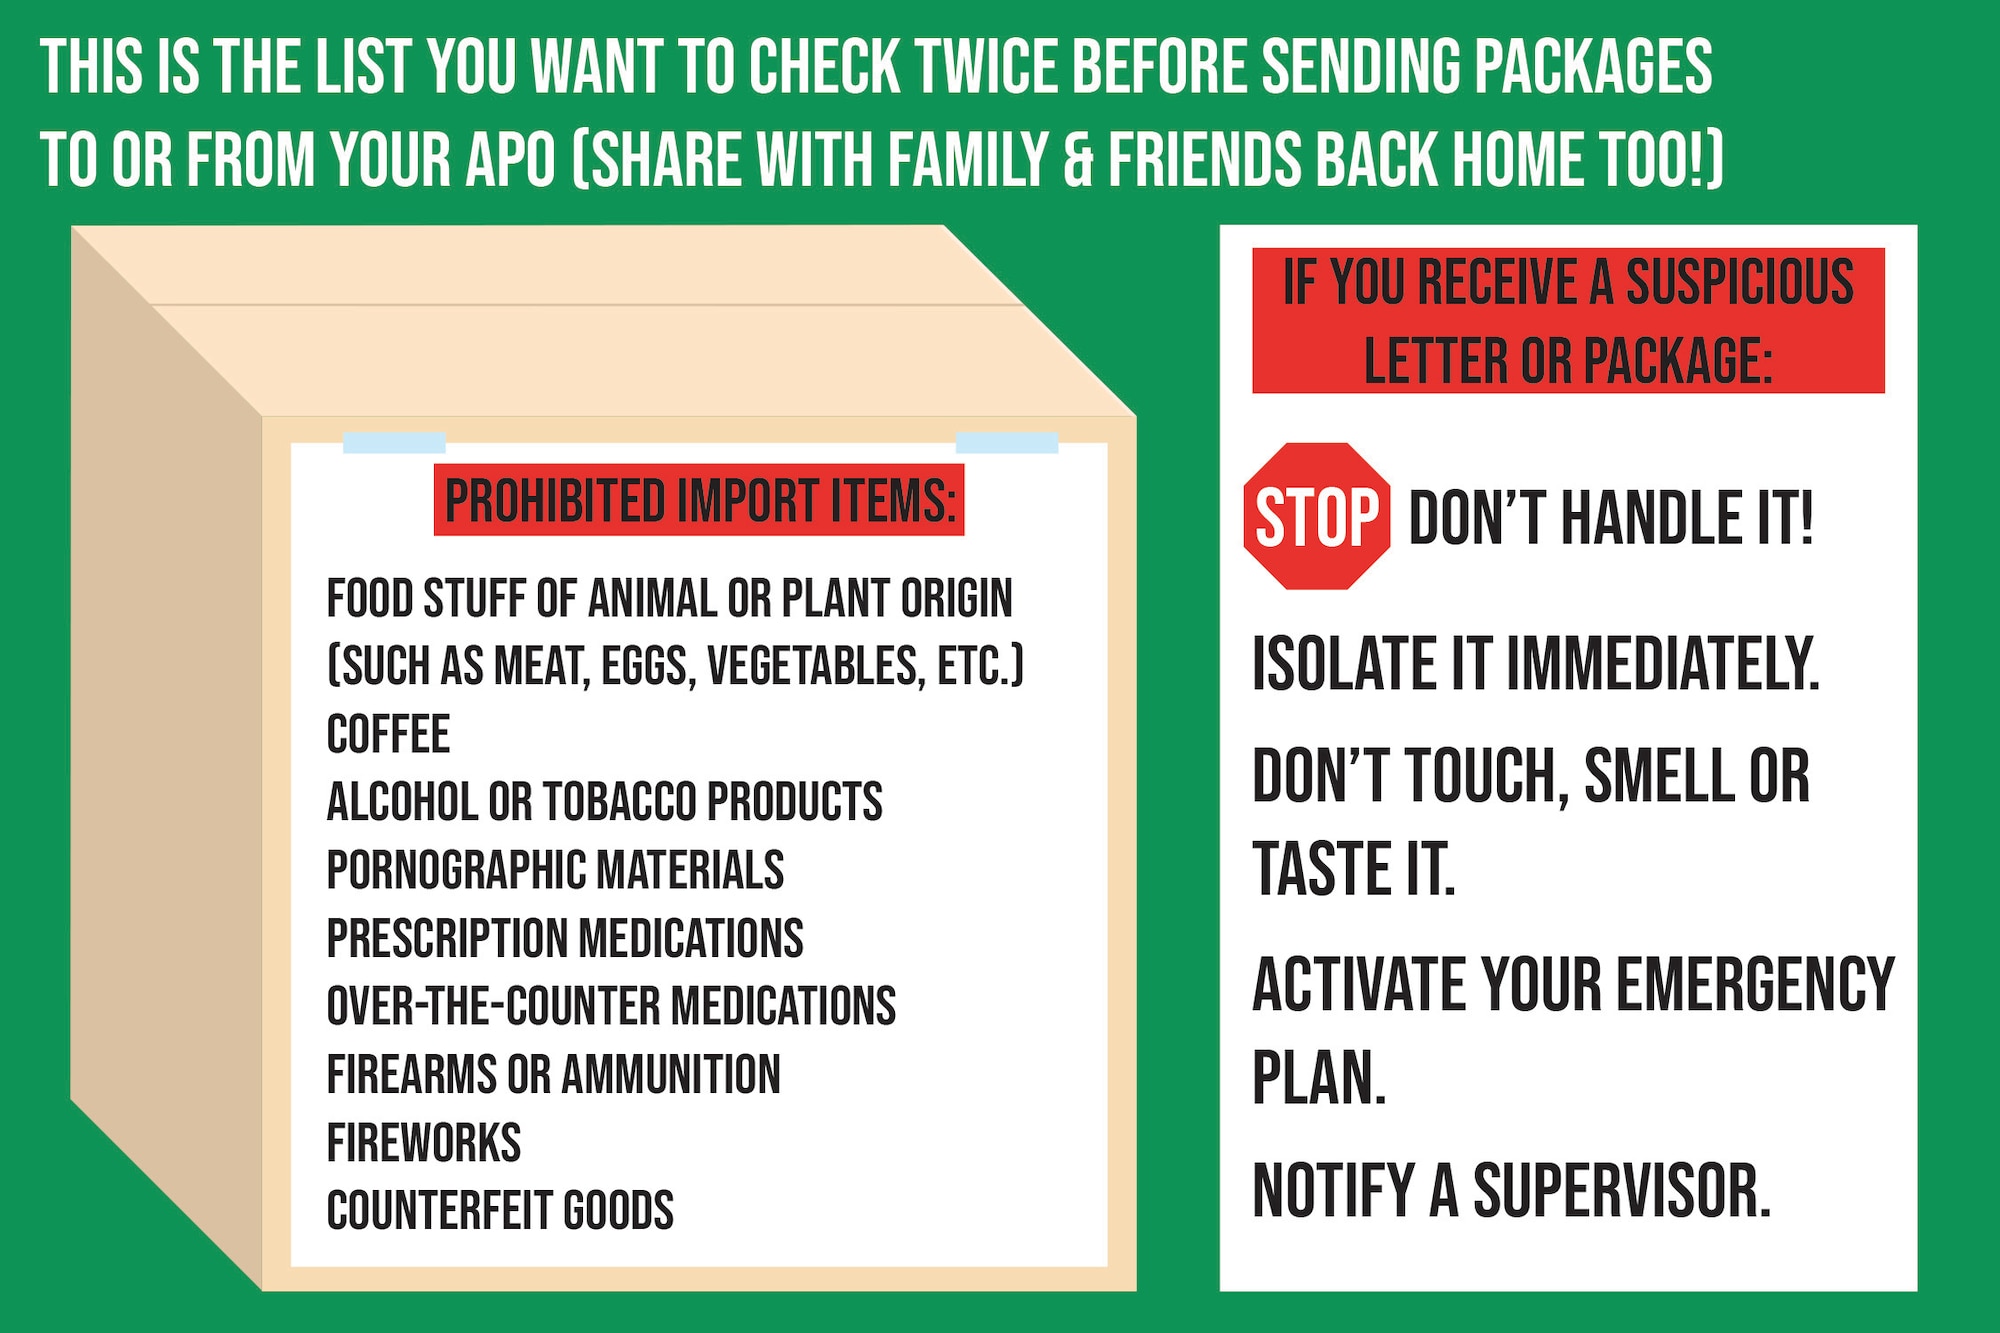 A graphic with a green background has a box image depicted on it listing items prohibited to send through an APO. On the right side of the image, there is a list of instructions for what do to if a person encounters a suspicious package and contact information for the post office.